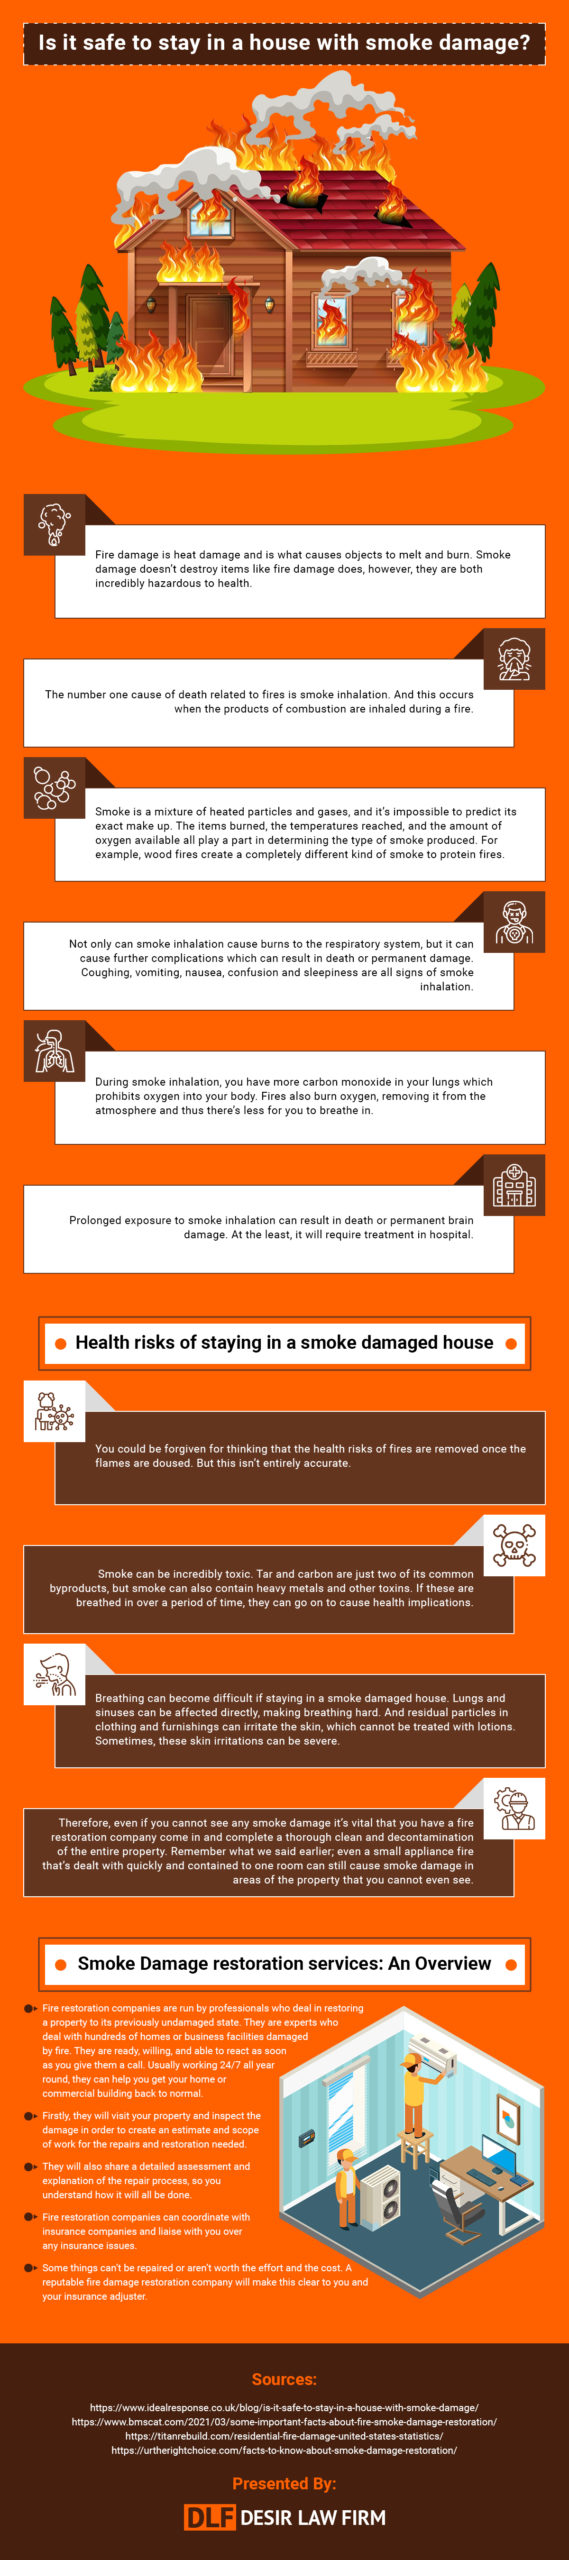 [Infographic] Is It Safe To Stay In a House With Smoke Damage?